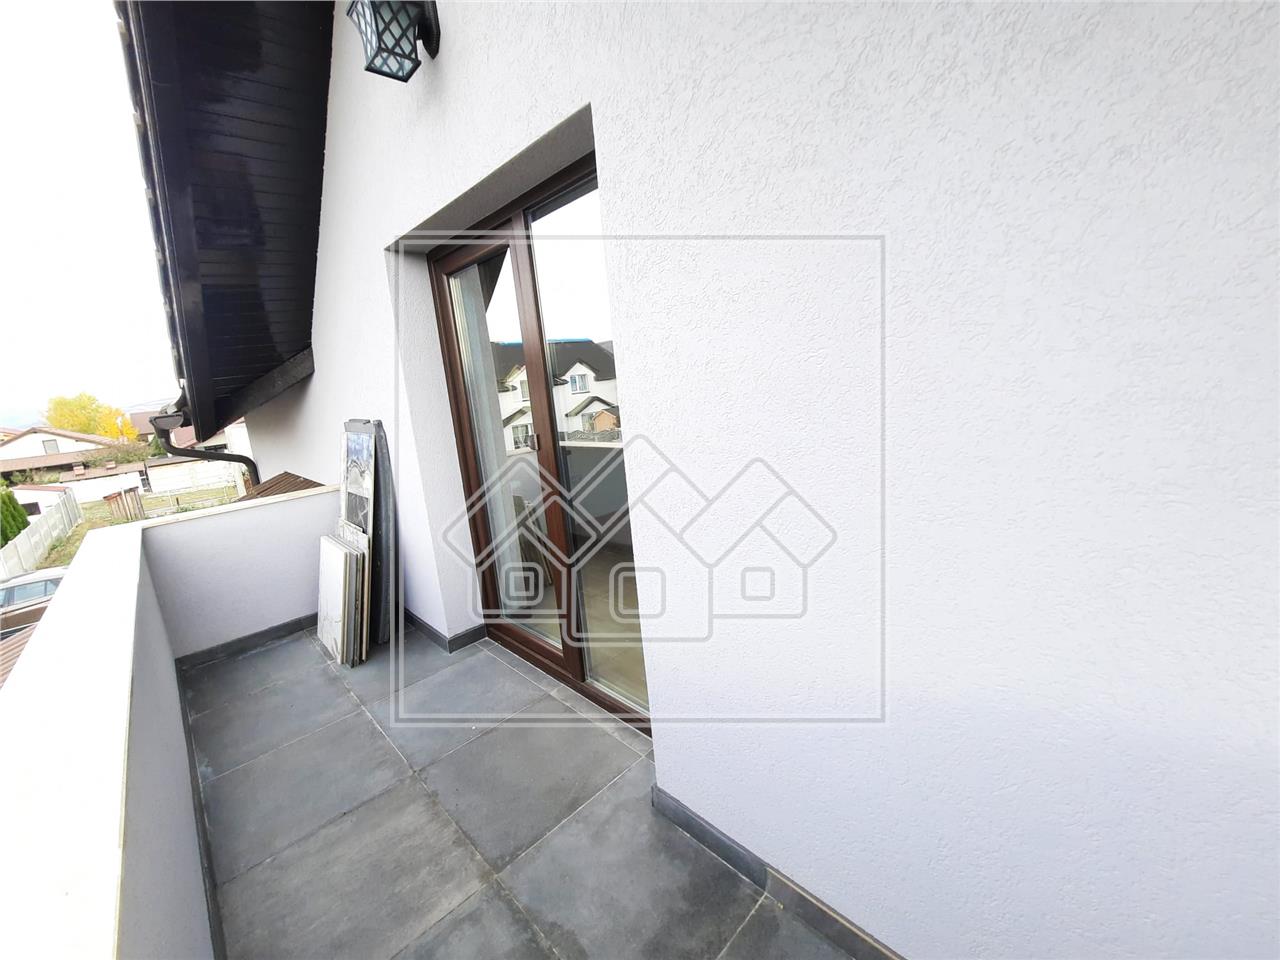 House for sale in Alba Iulia - detached - 6 rooms